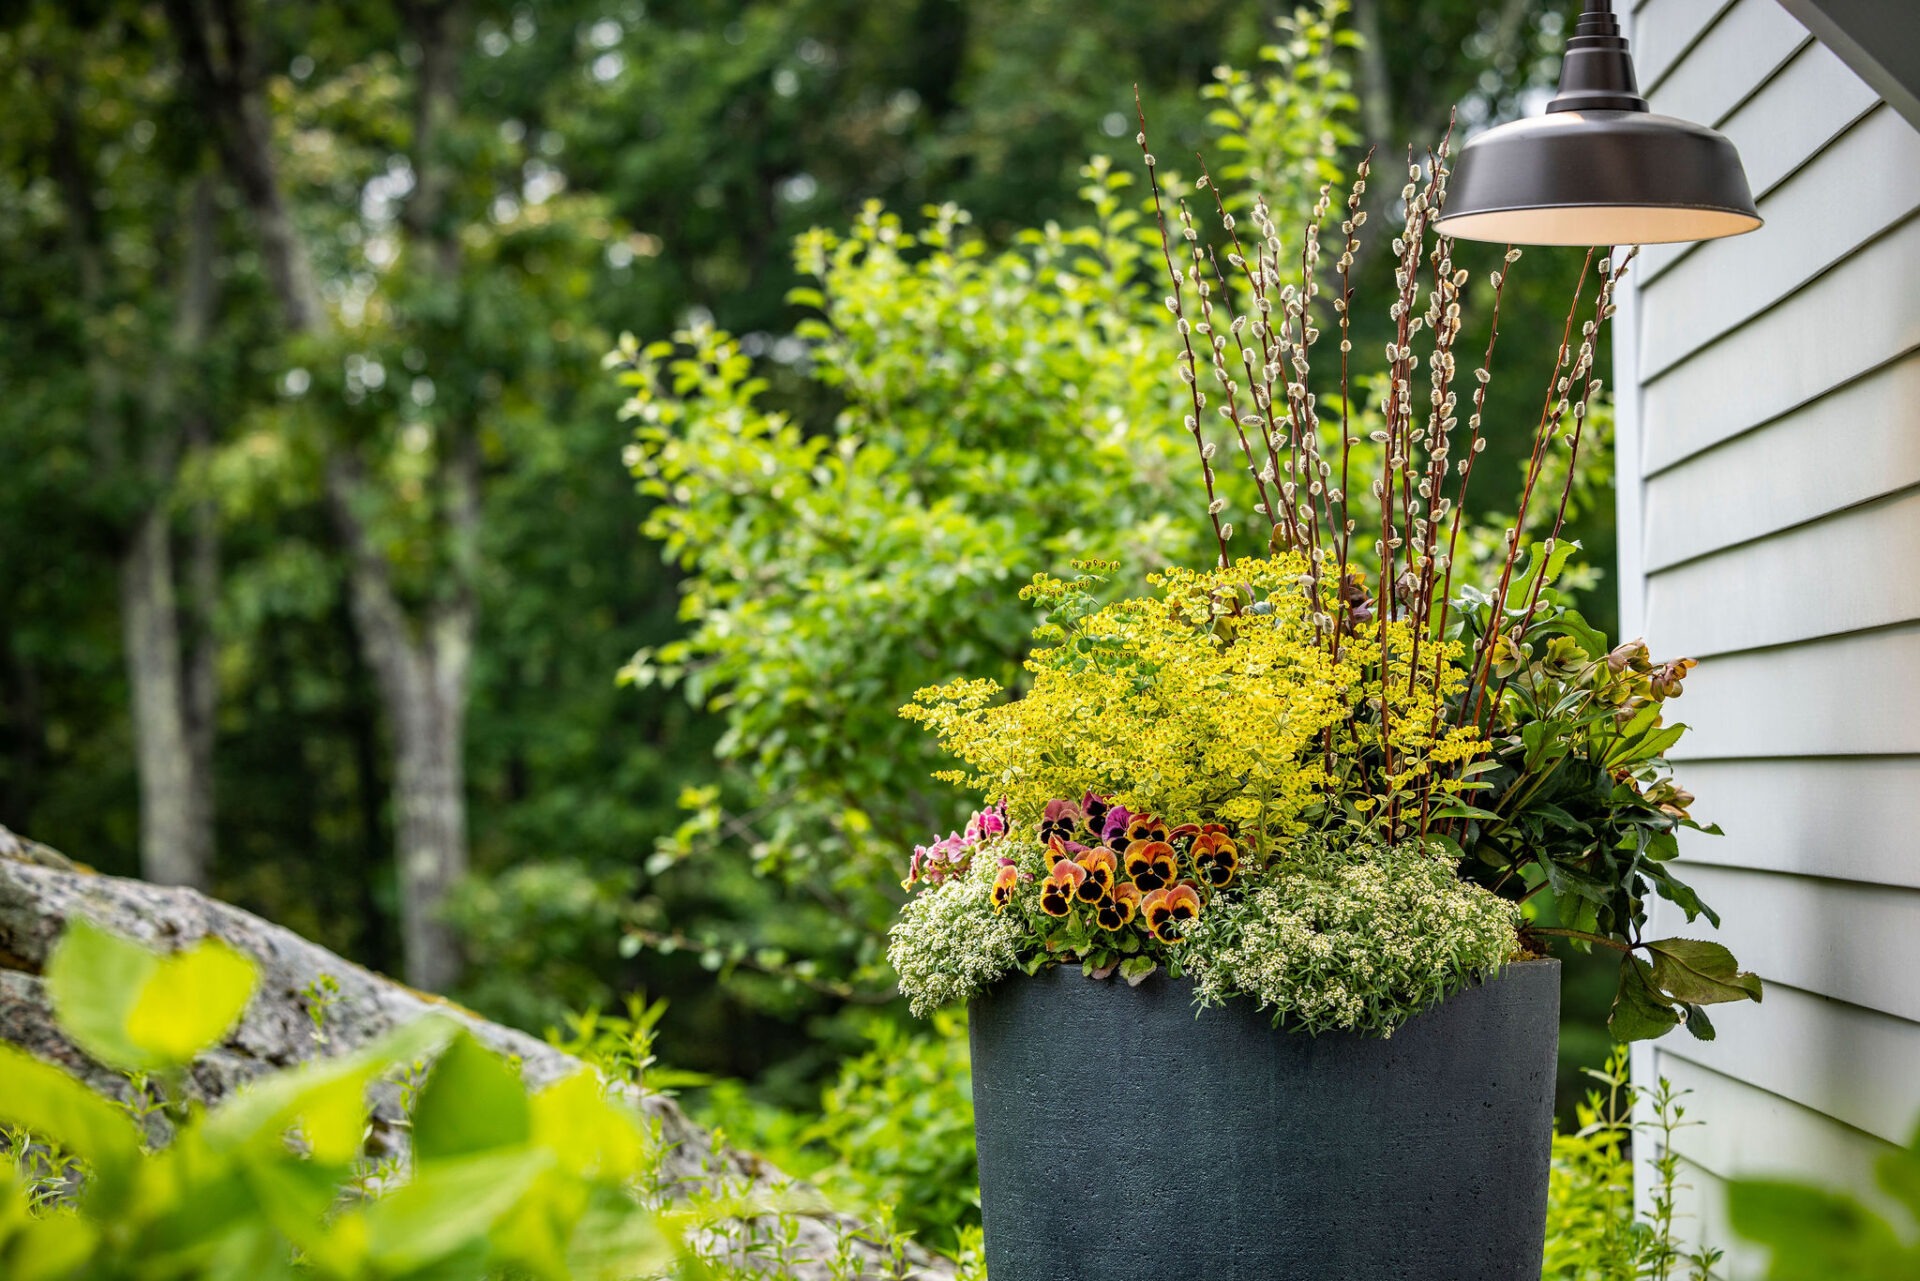 A diverse arrangement of flowers and plants fills a dark planter beside a house, under an outdoor lamp, with a verdant forest background.